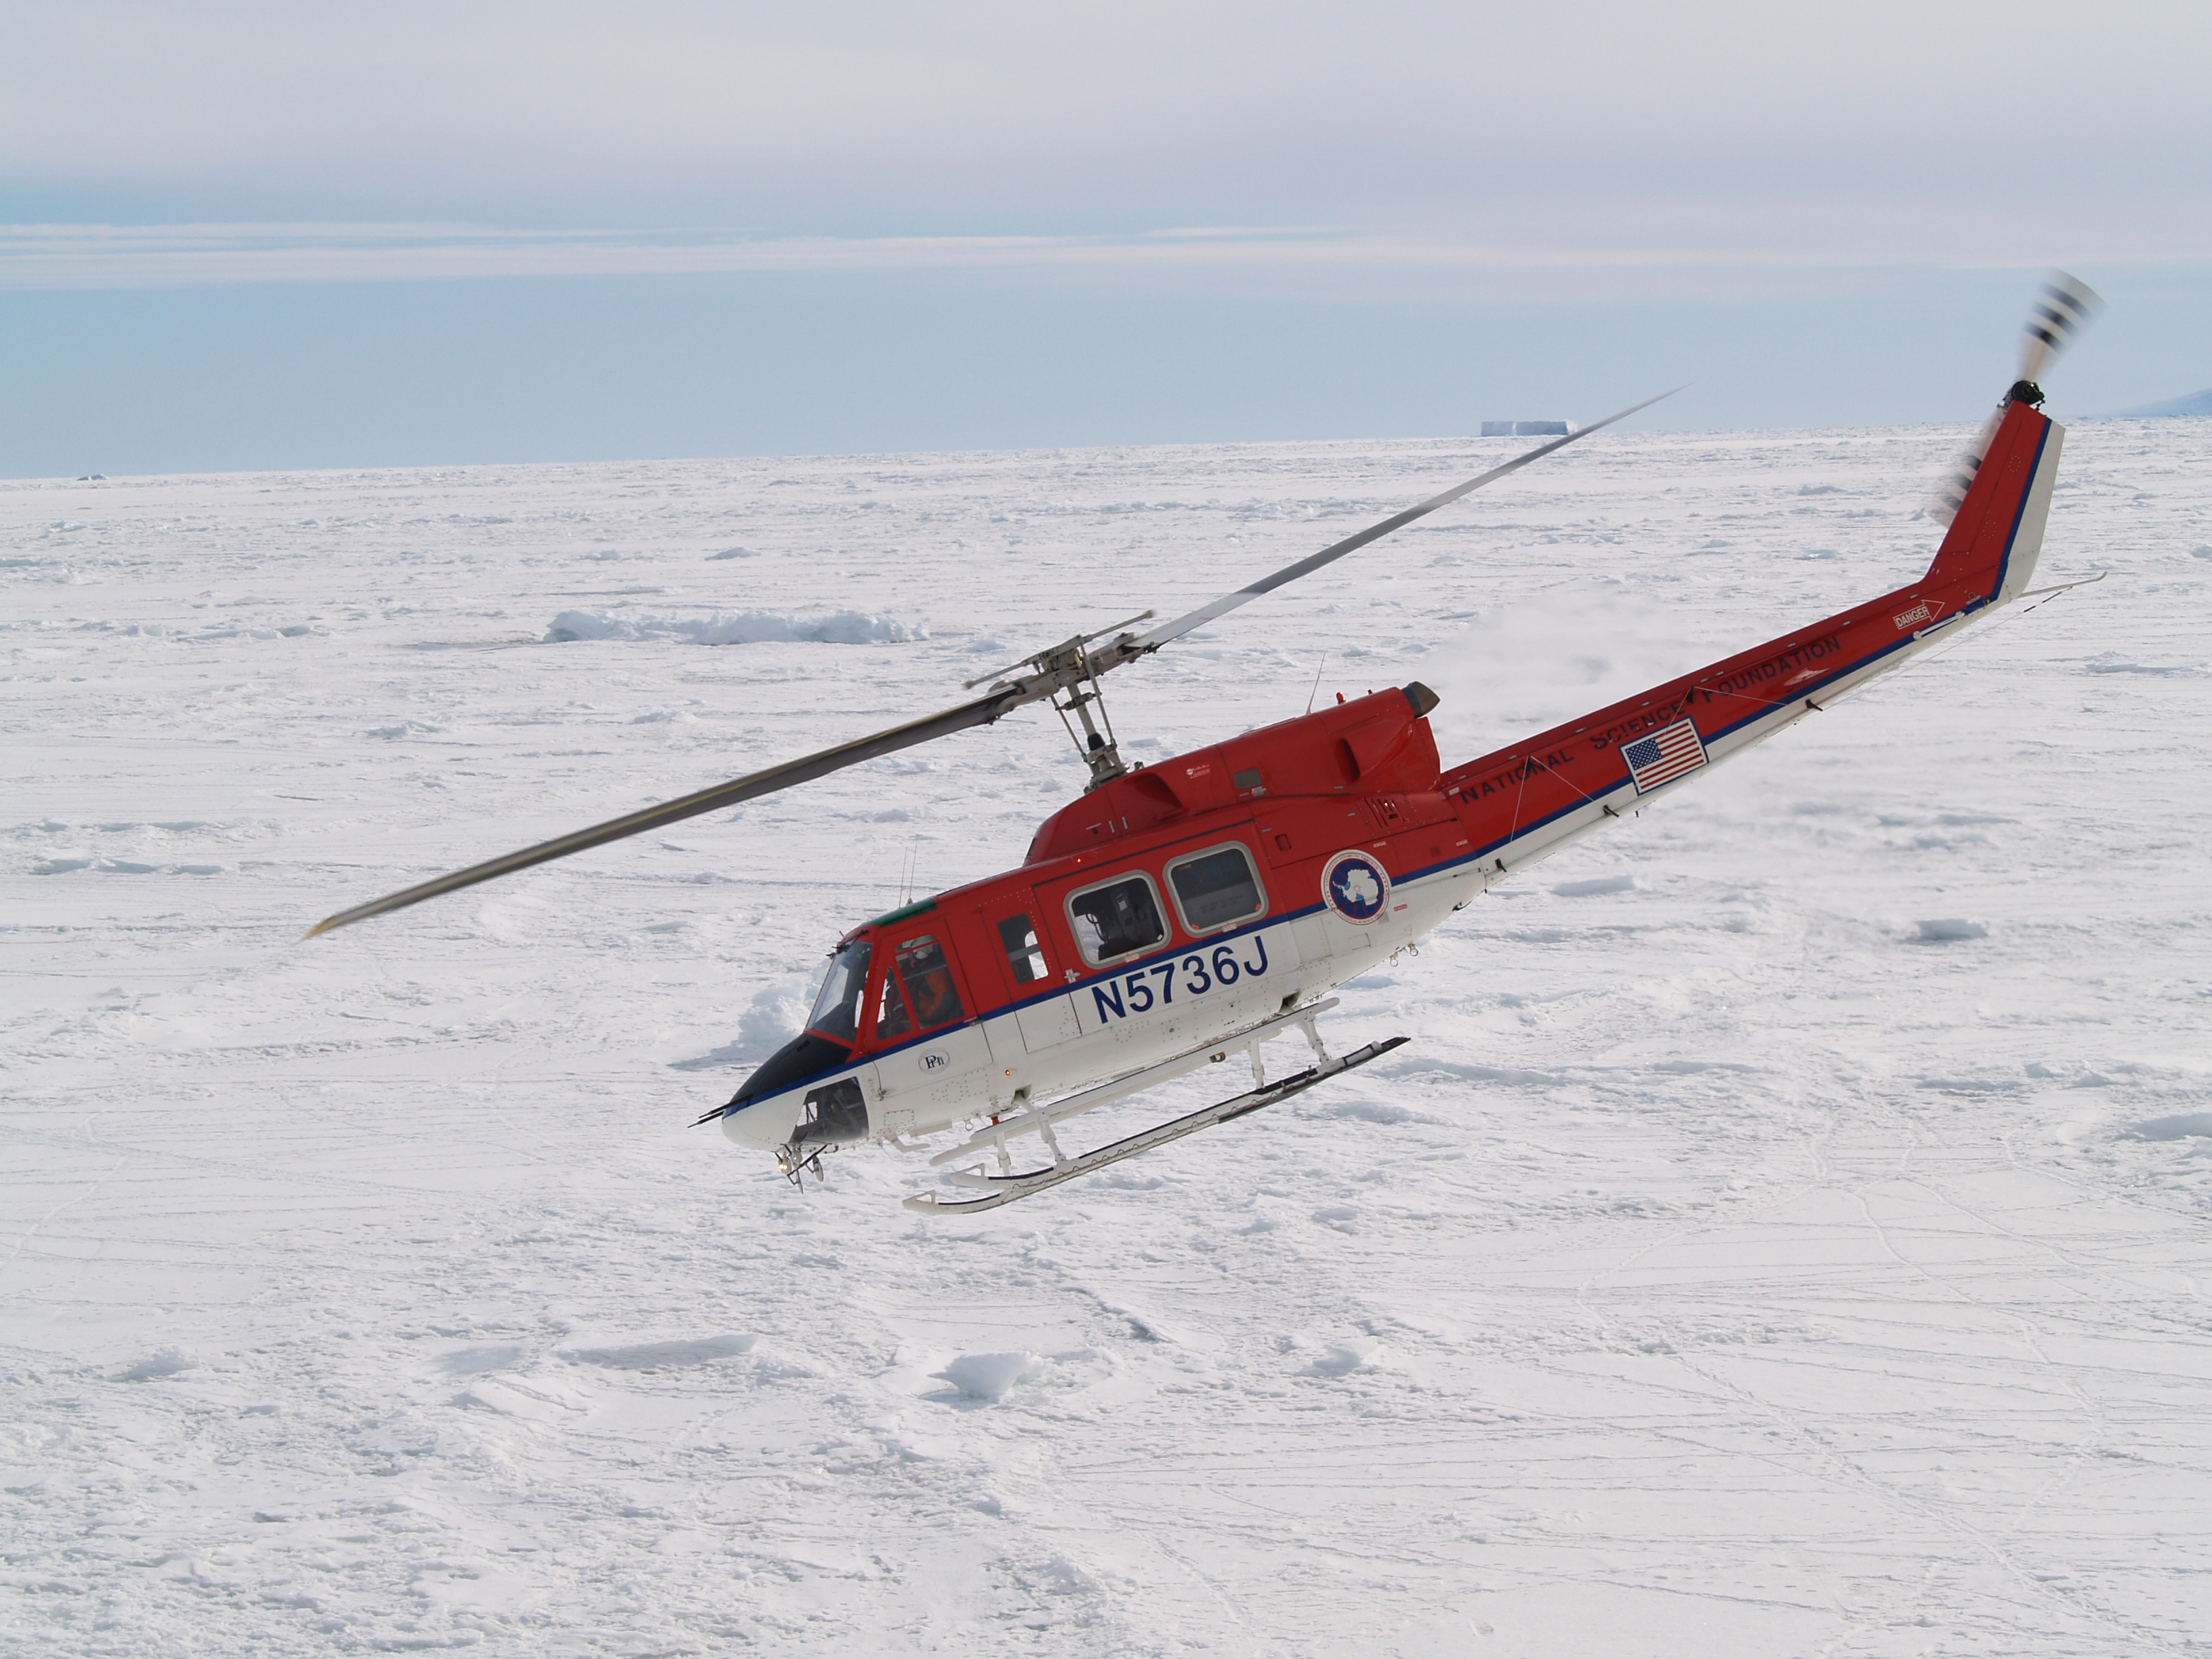 A helicopter flies over ice.